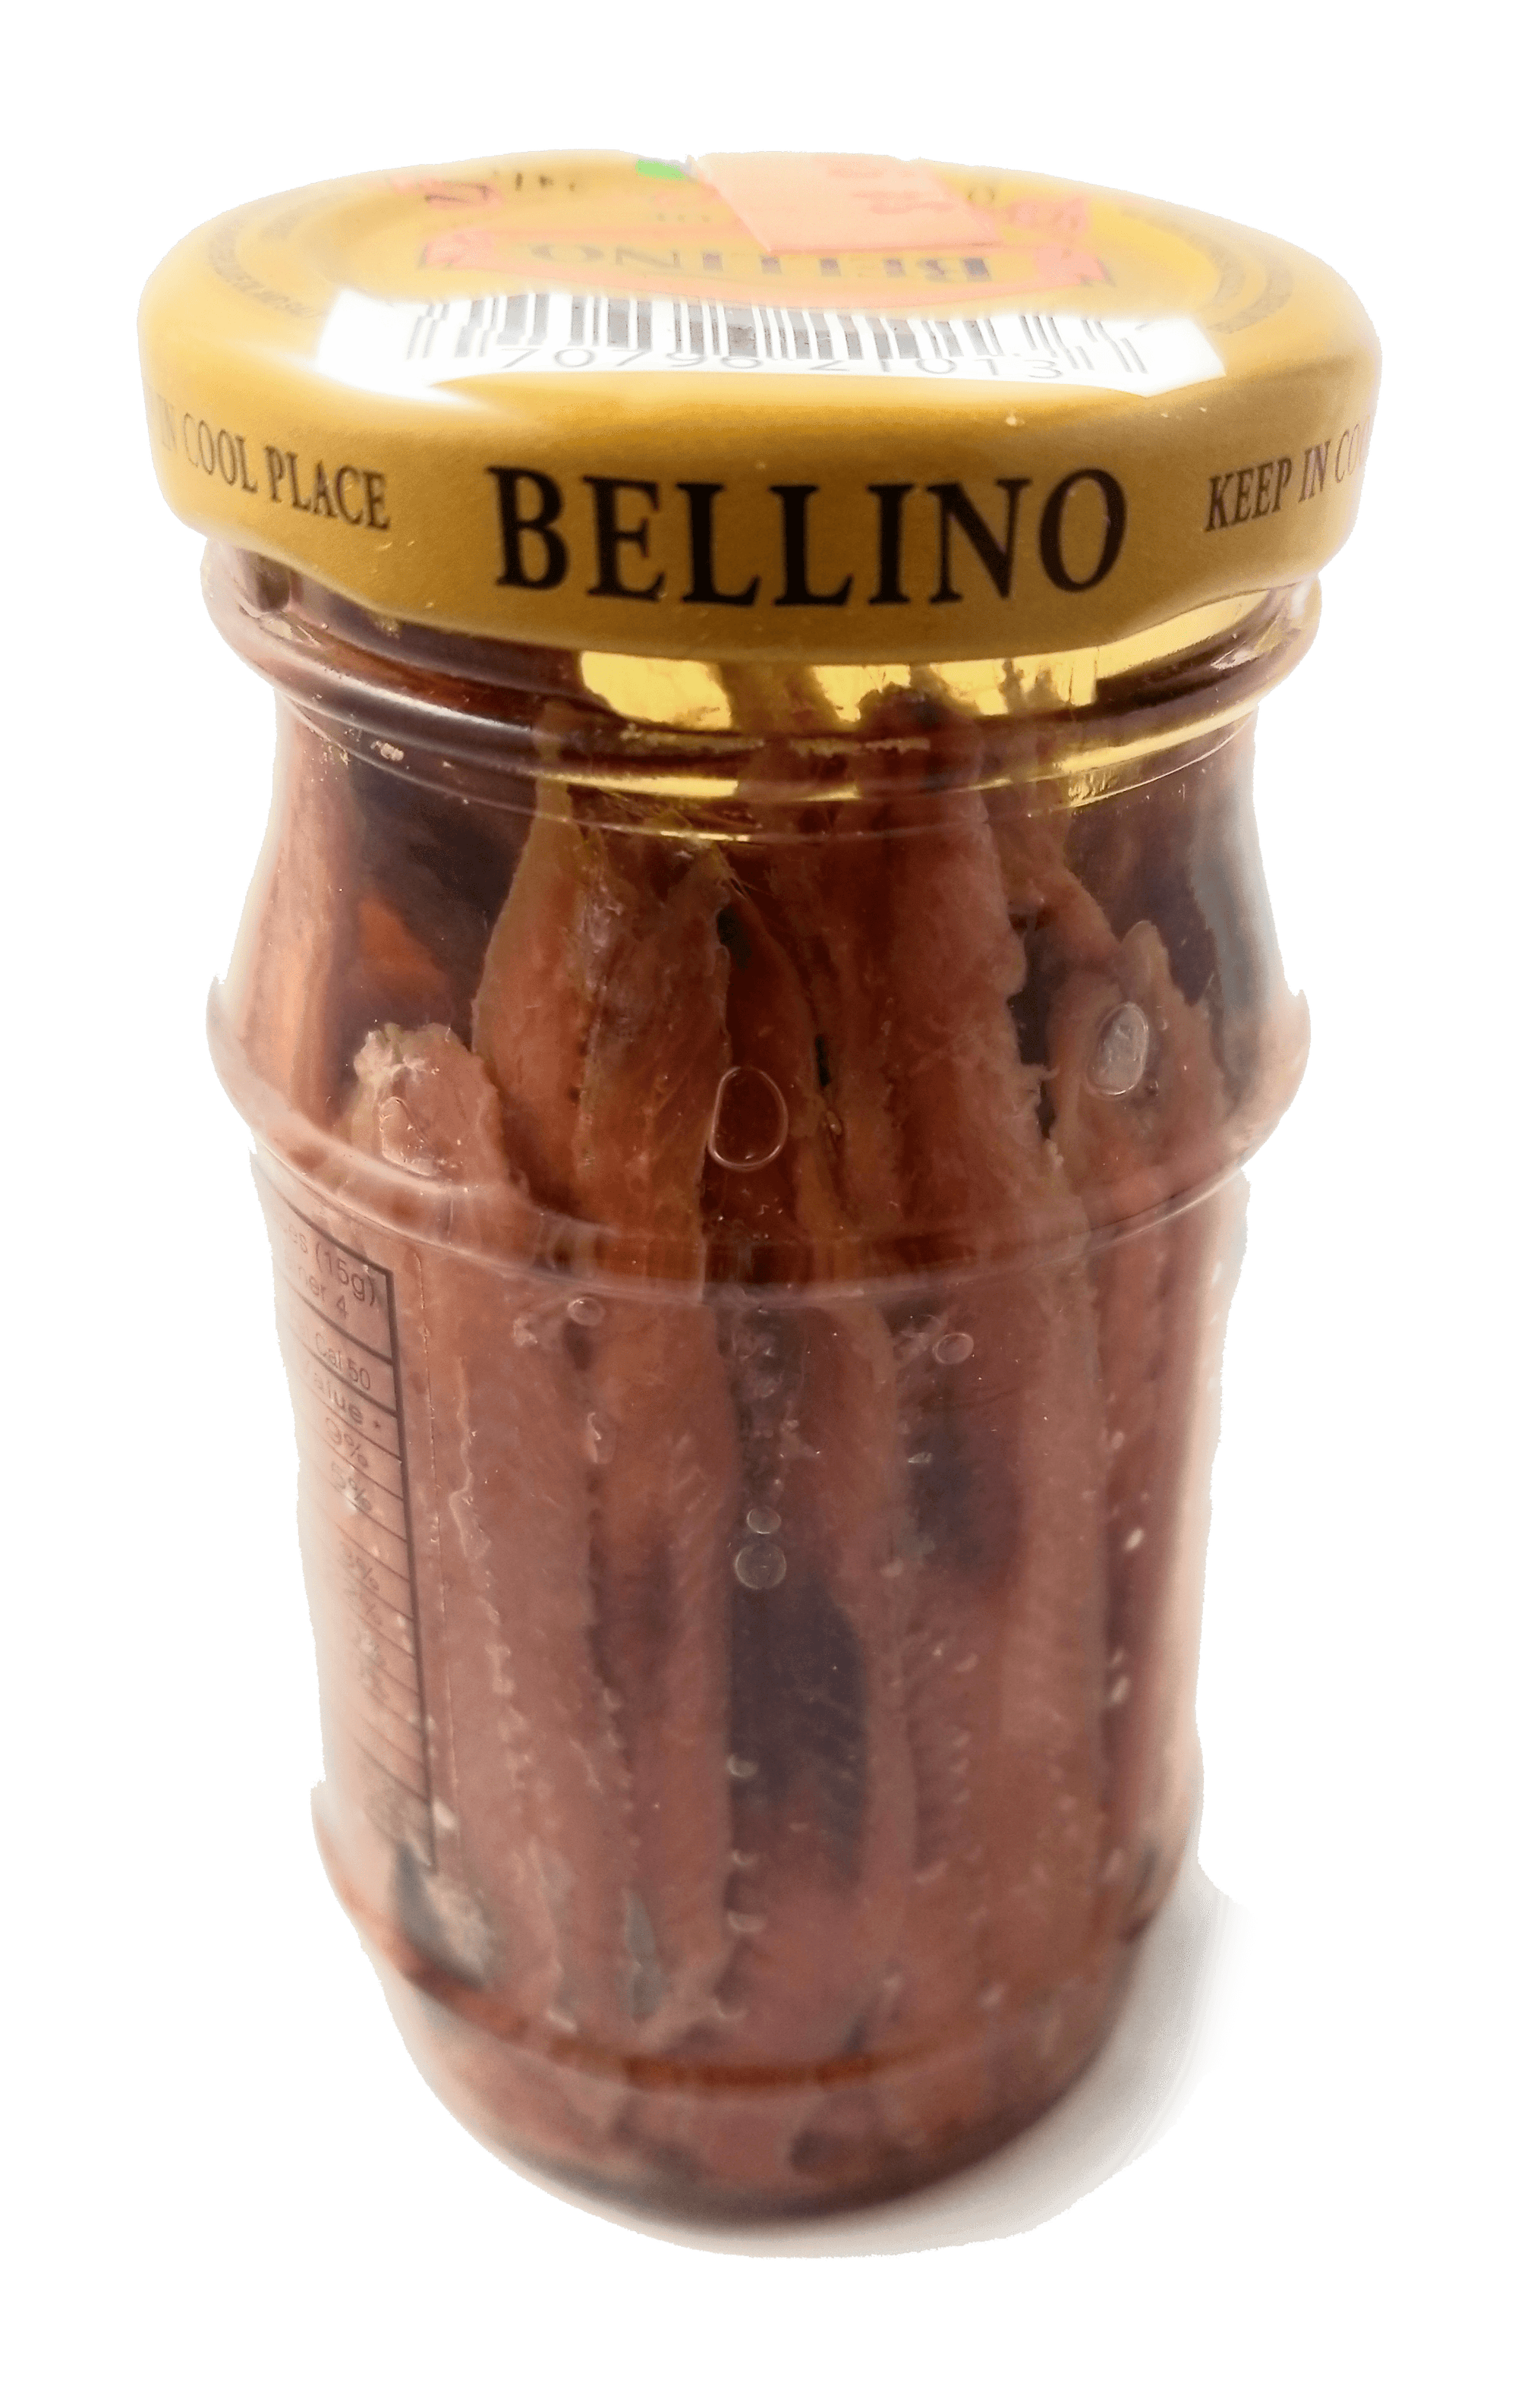 Bellino Fillet of Anchovy, 4.25-Ounce Glass Jars - (Pack of 4)